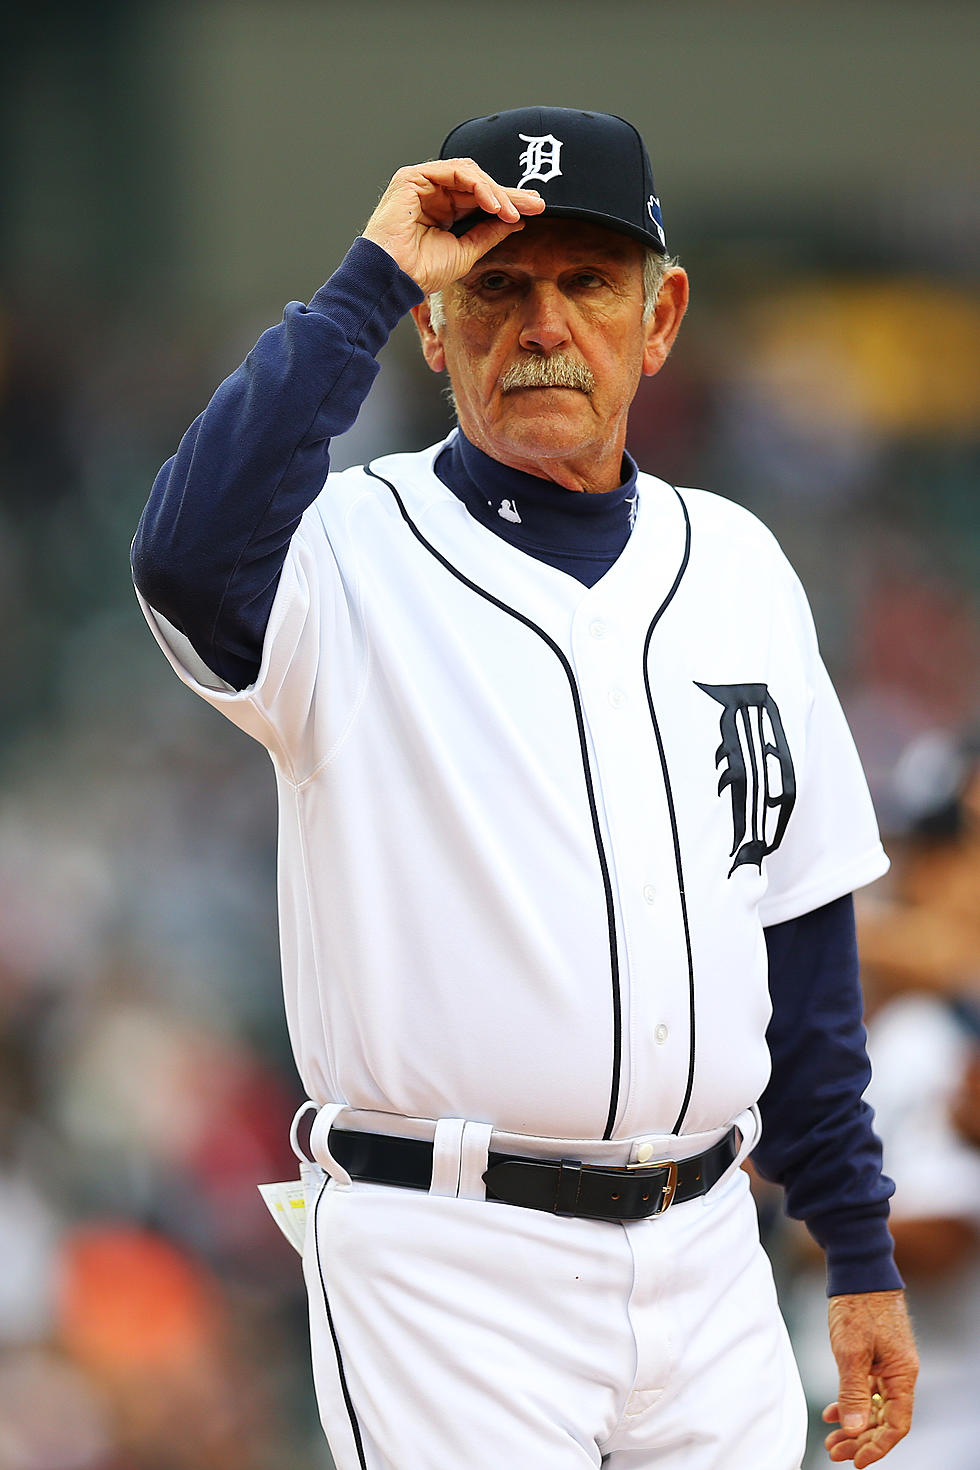 Why Were Detroit Tigers Fans So Hard On Jim Leyland?